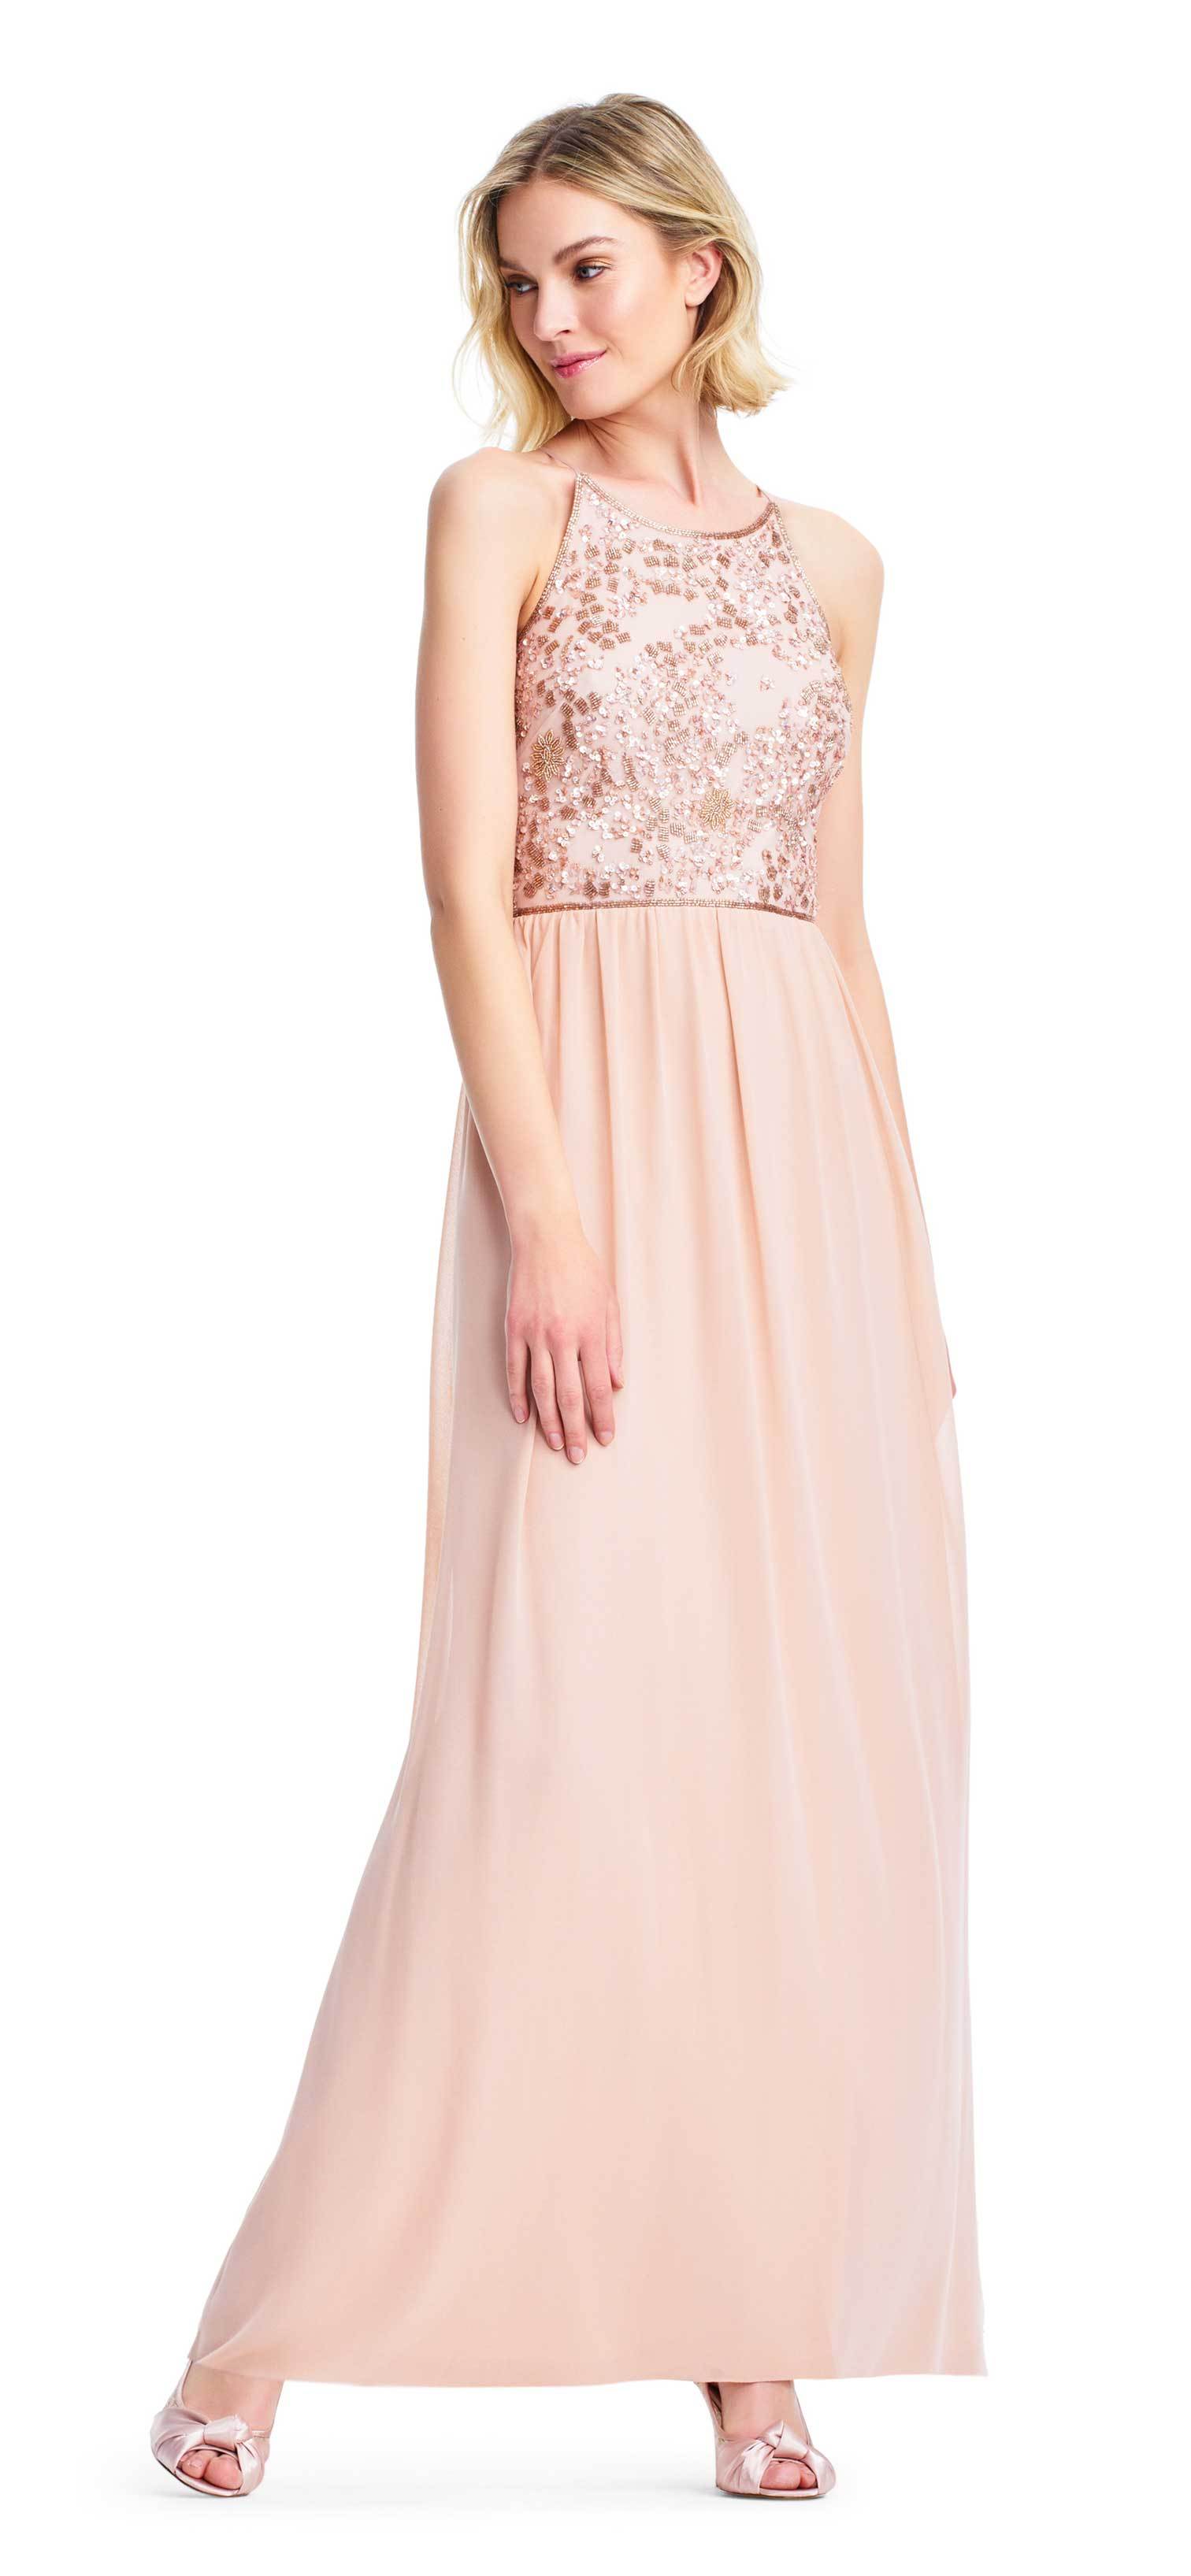 Adrianna Papell - AP1E203111 Bedazzled Halter Chiffon A-line Dress